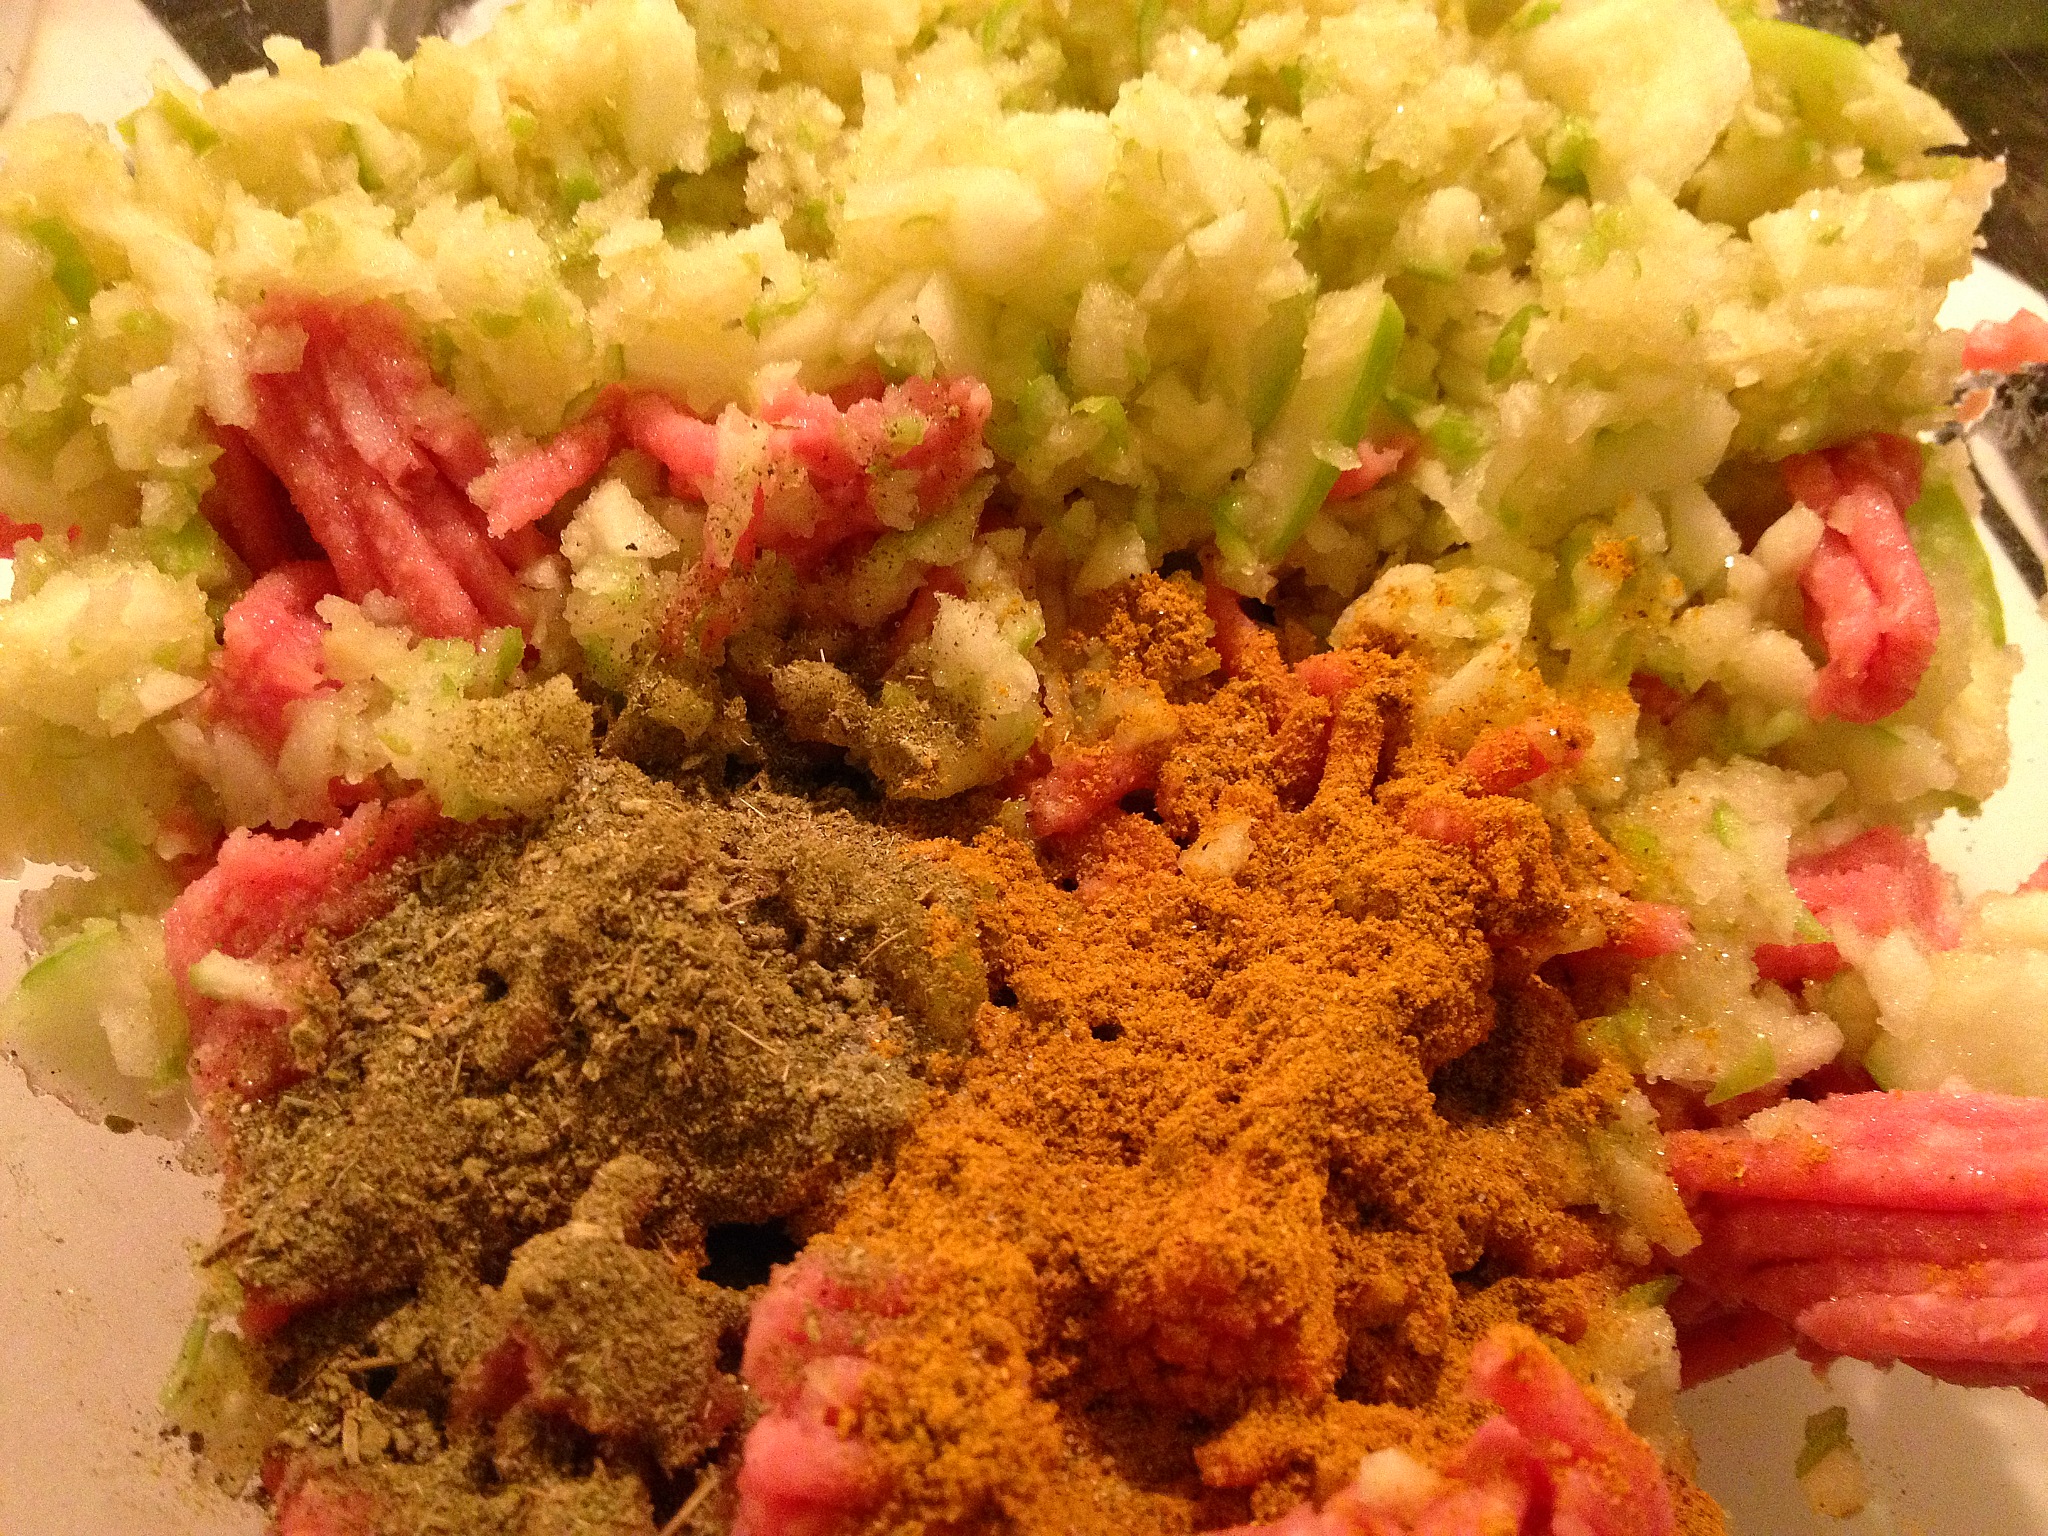 Combining ground turkey, shredded green apple and spices for curried turkey burgers